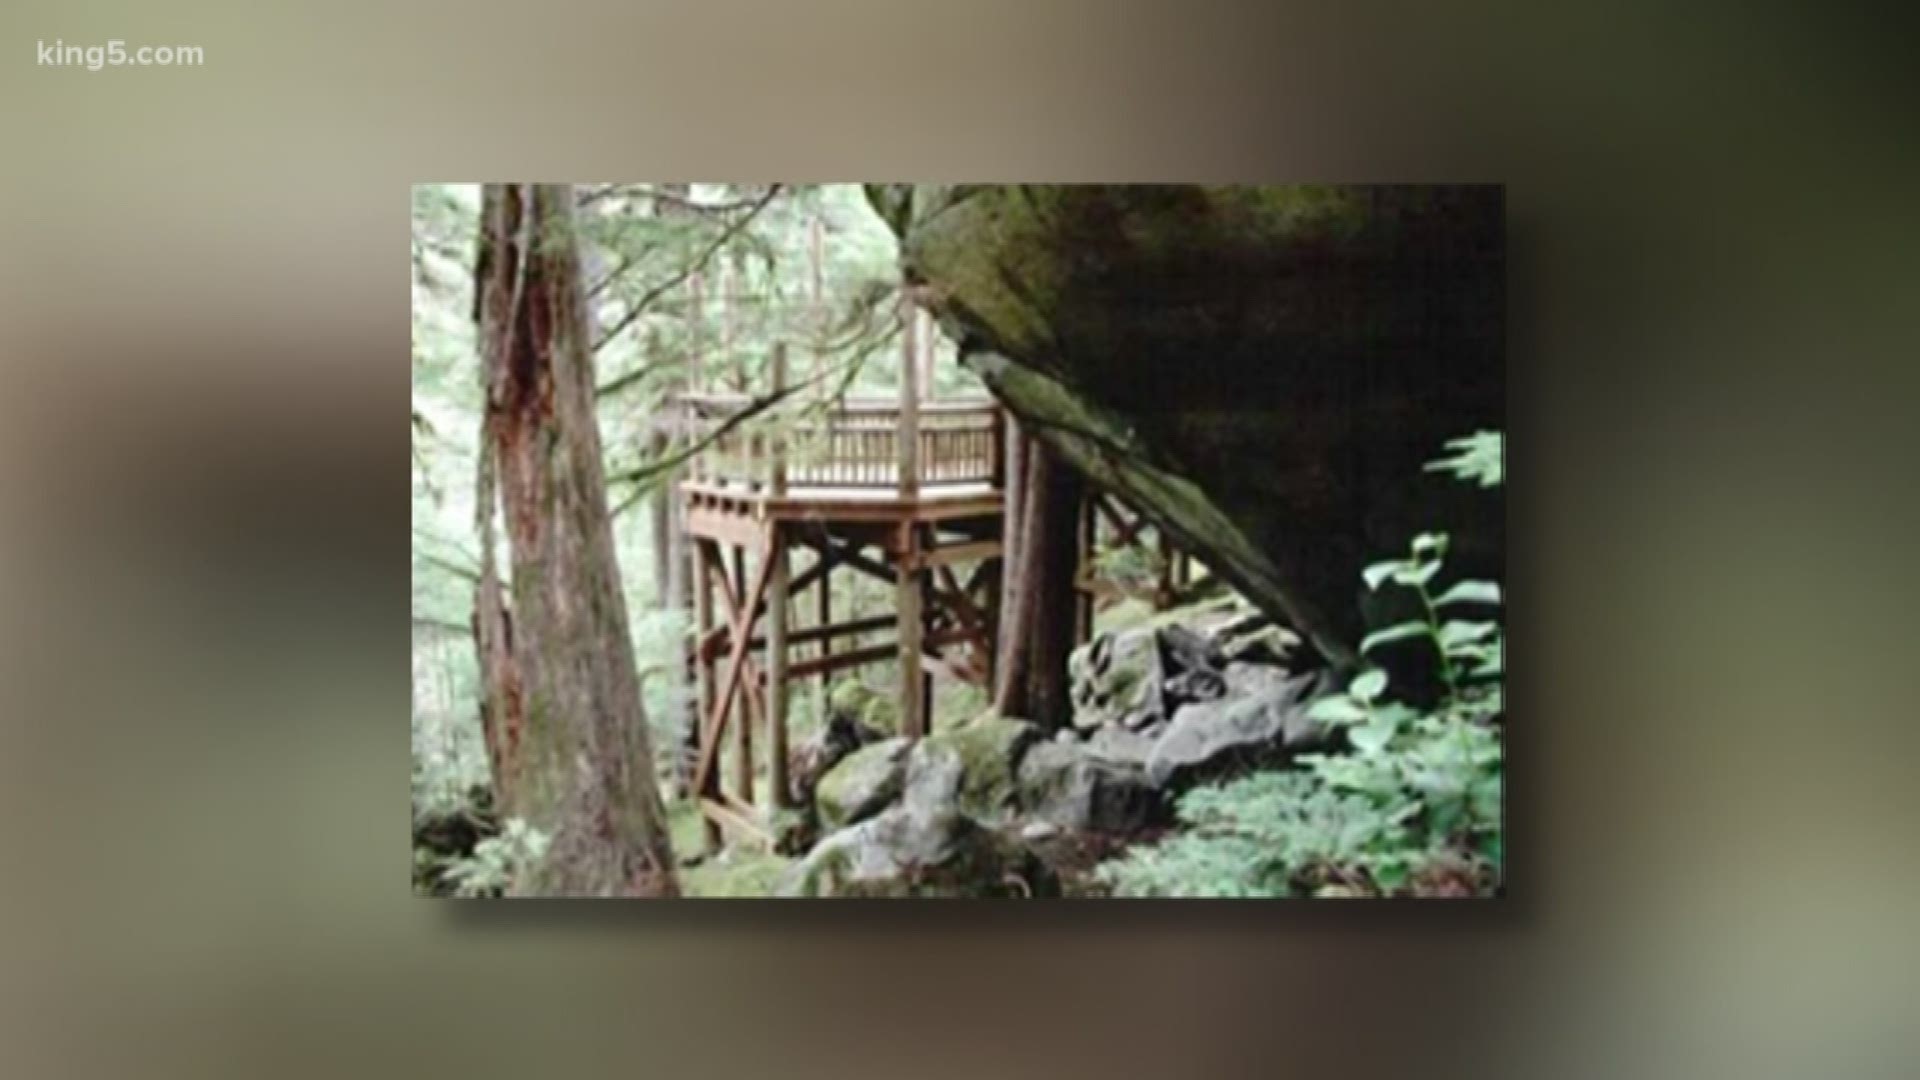 A local tribe is offering a cash reward to help find whoever looted a native american archaeological site in North Cascades National Park.